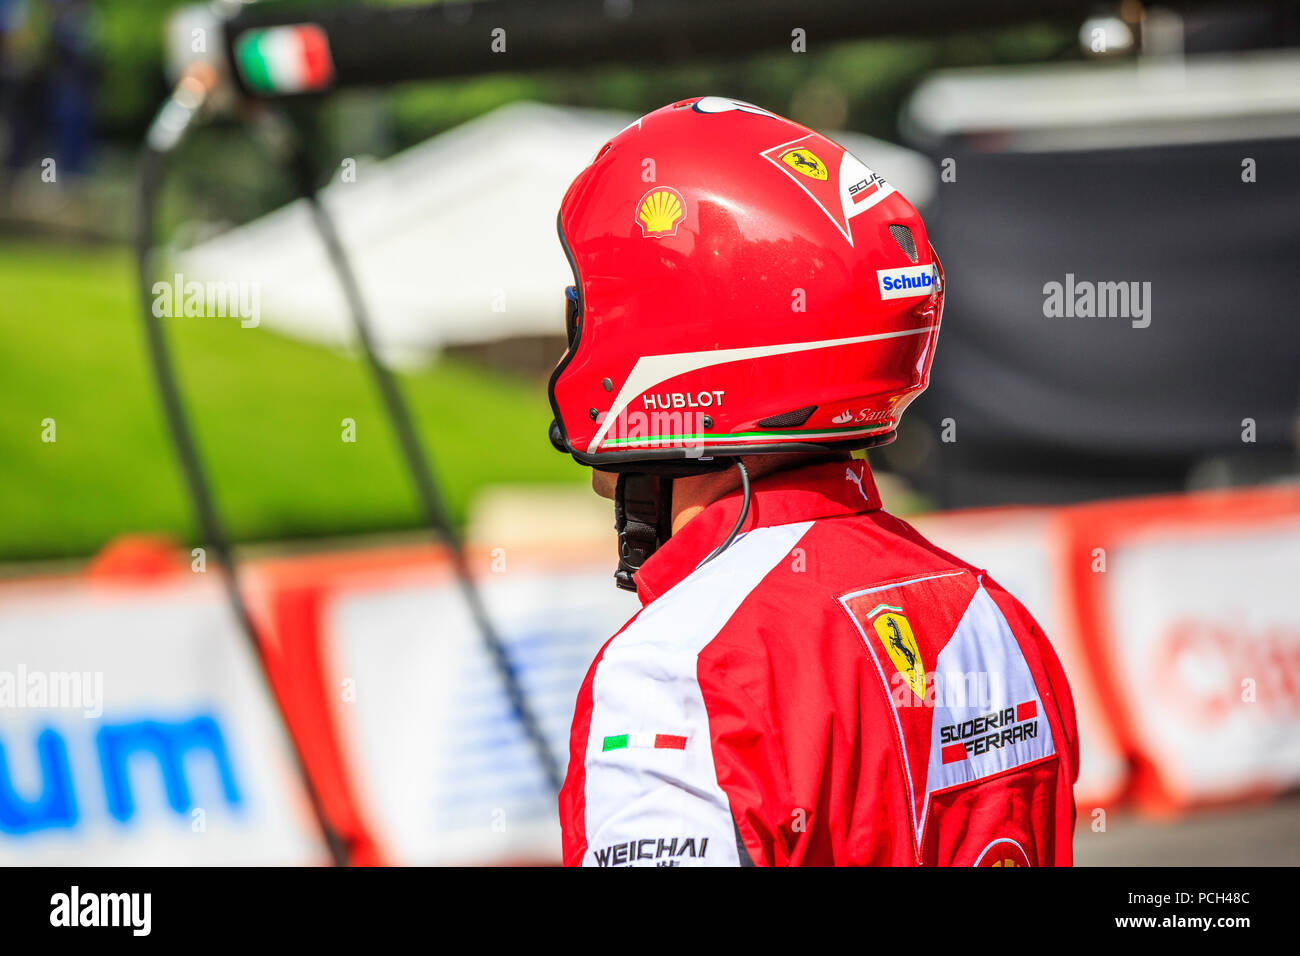 Mexico City, Mexico - July 08, 2015: Pit Crew waiting to Esteban Gutiérrez on its Ferrari F1 F60 Car to arrive to the Pit Stop for the Wheel Change. At the Scuderia Ferrari Street Demo By Telcel - Infinitum. Stock Photo